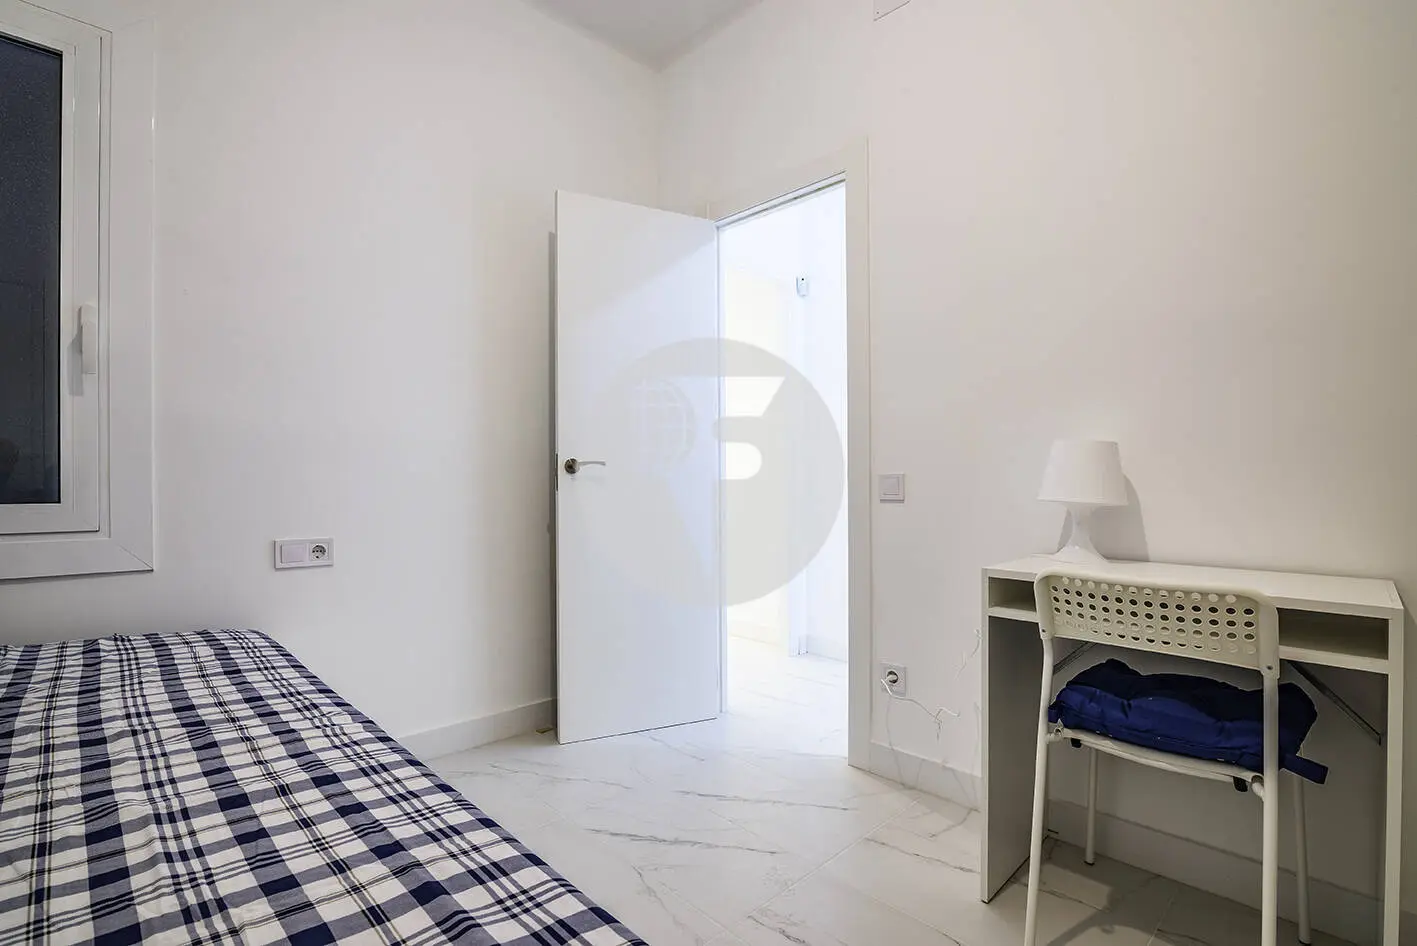 Brand new completely renovated apartment on Aragó street in the heart of El Clot in Barcelona. 39